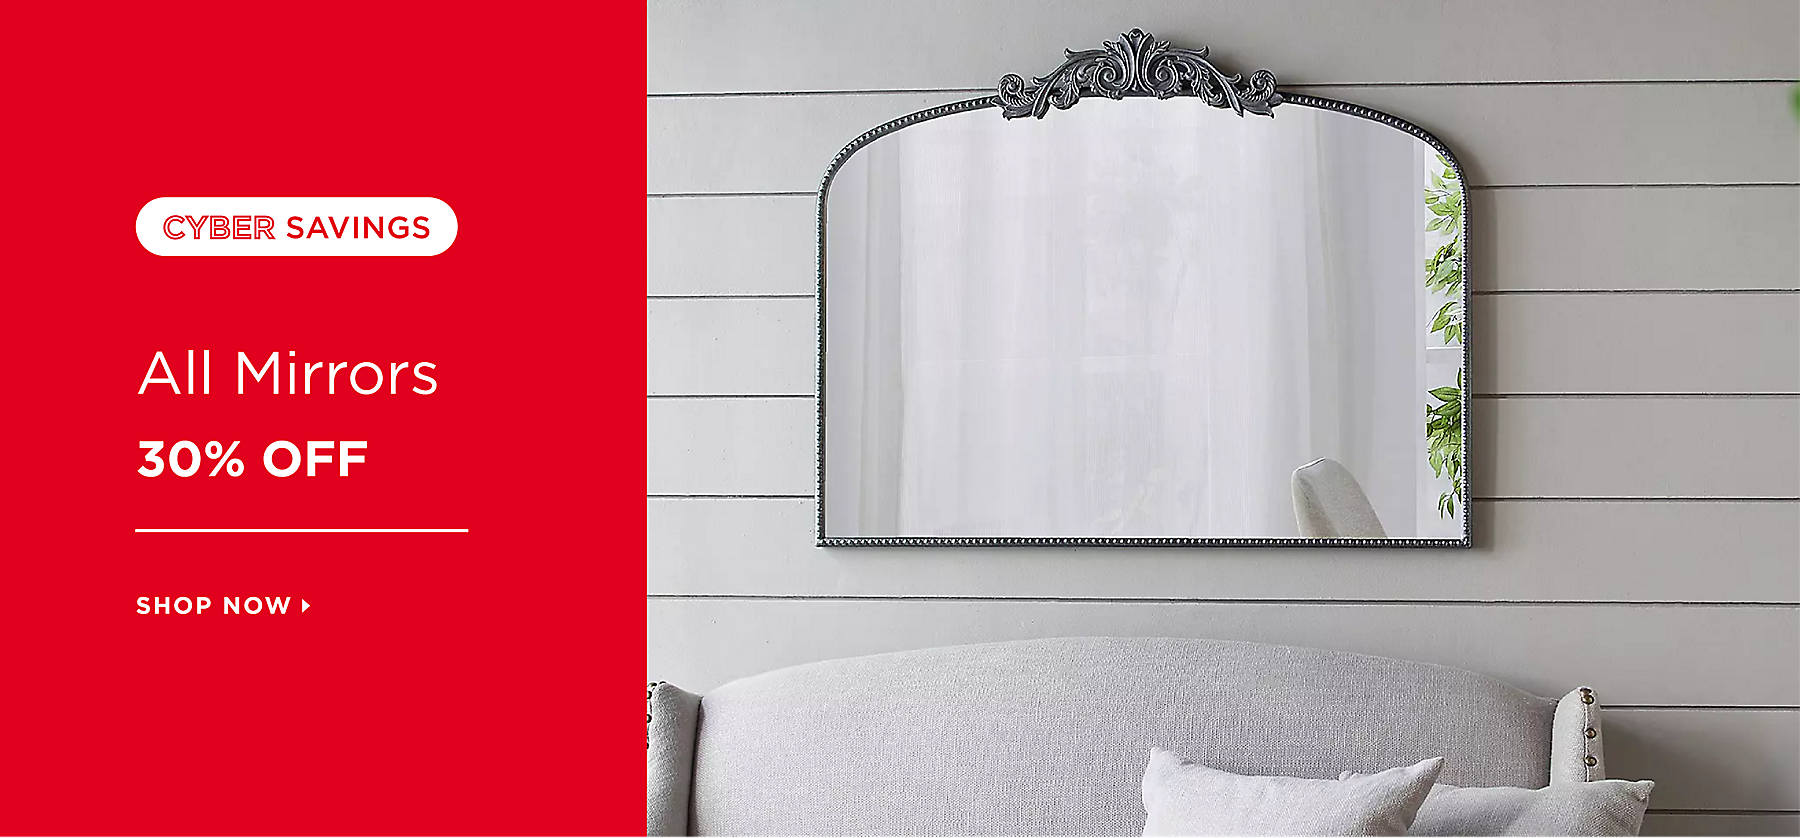 Cyber Savings All Mirrors 30% Off Shop Now